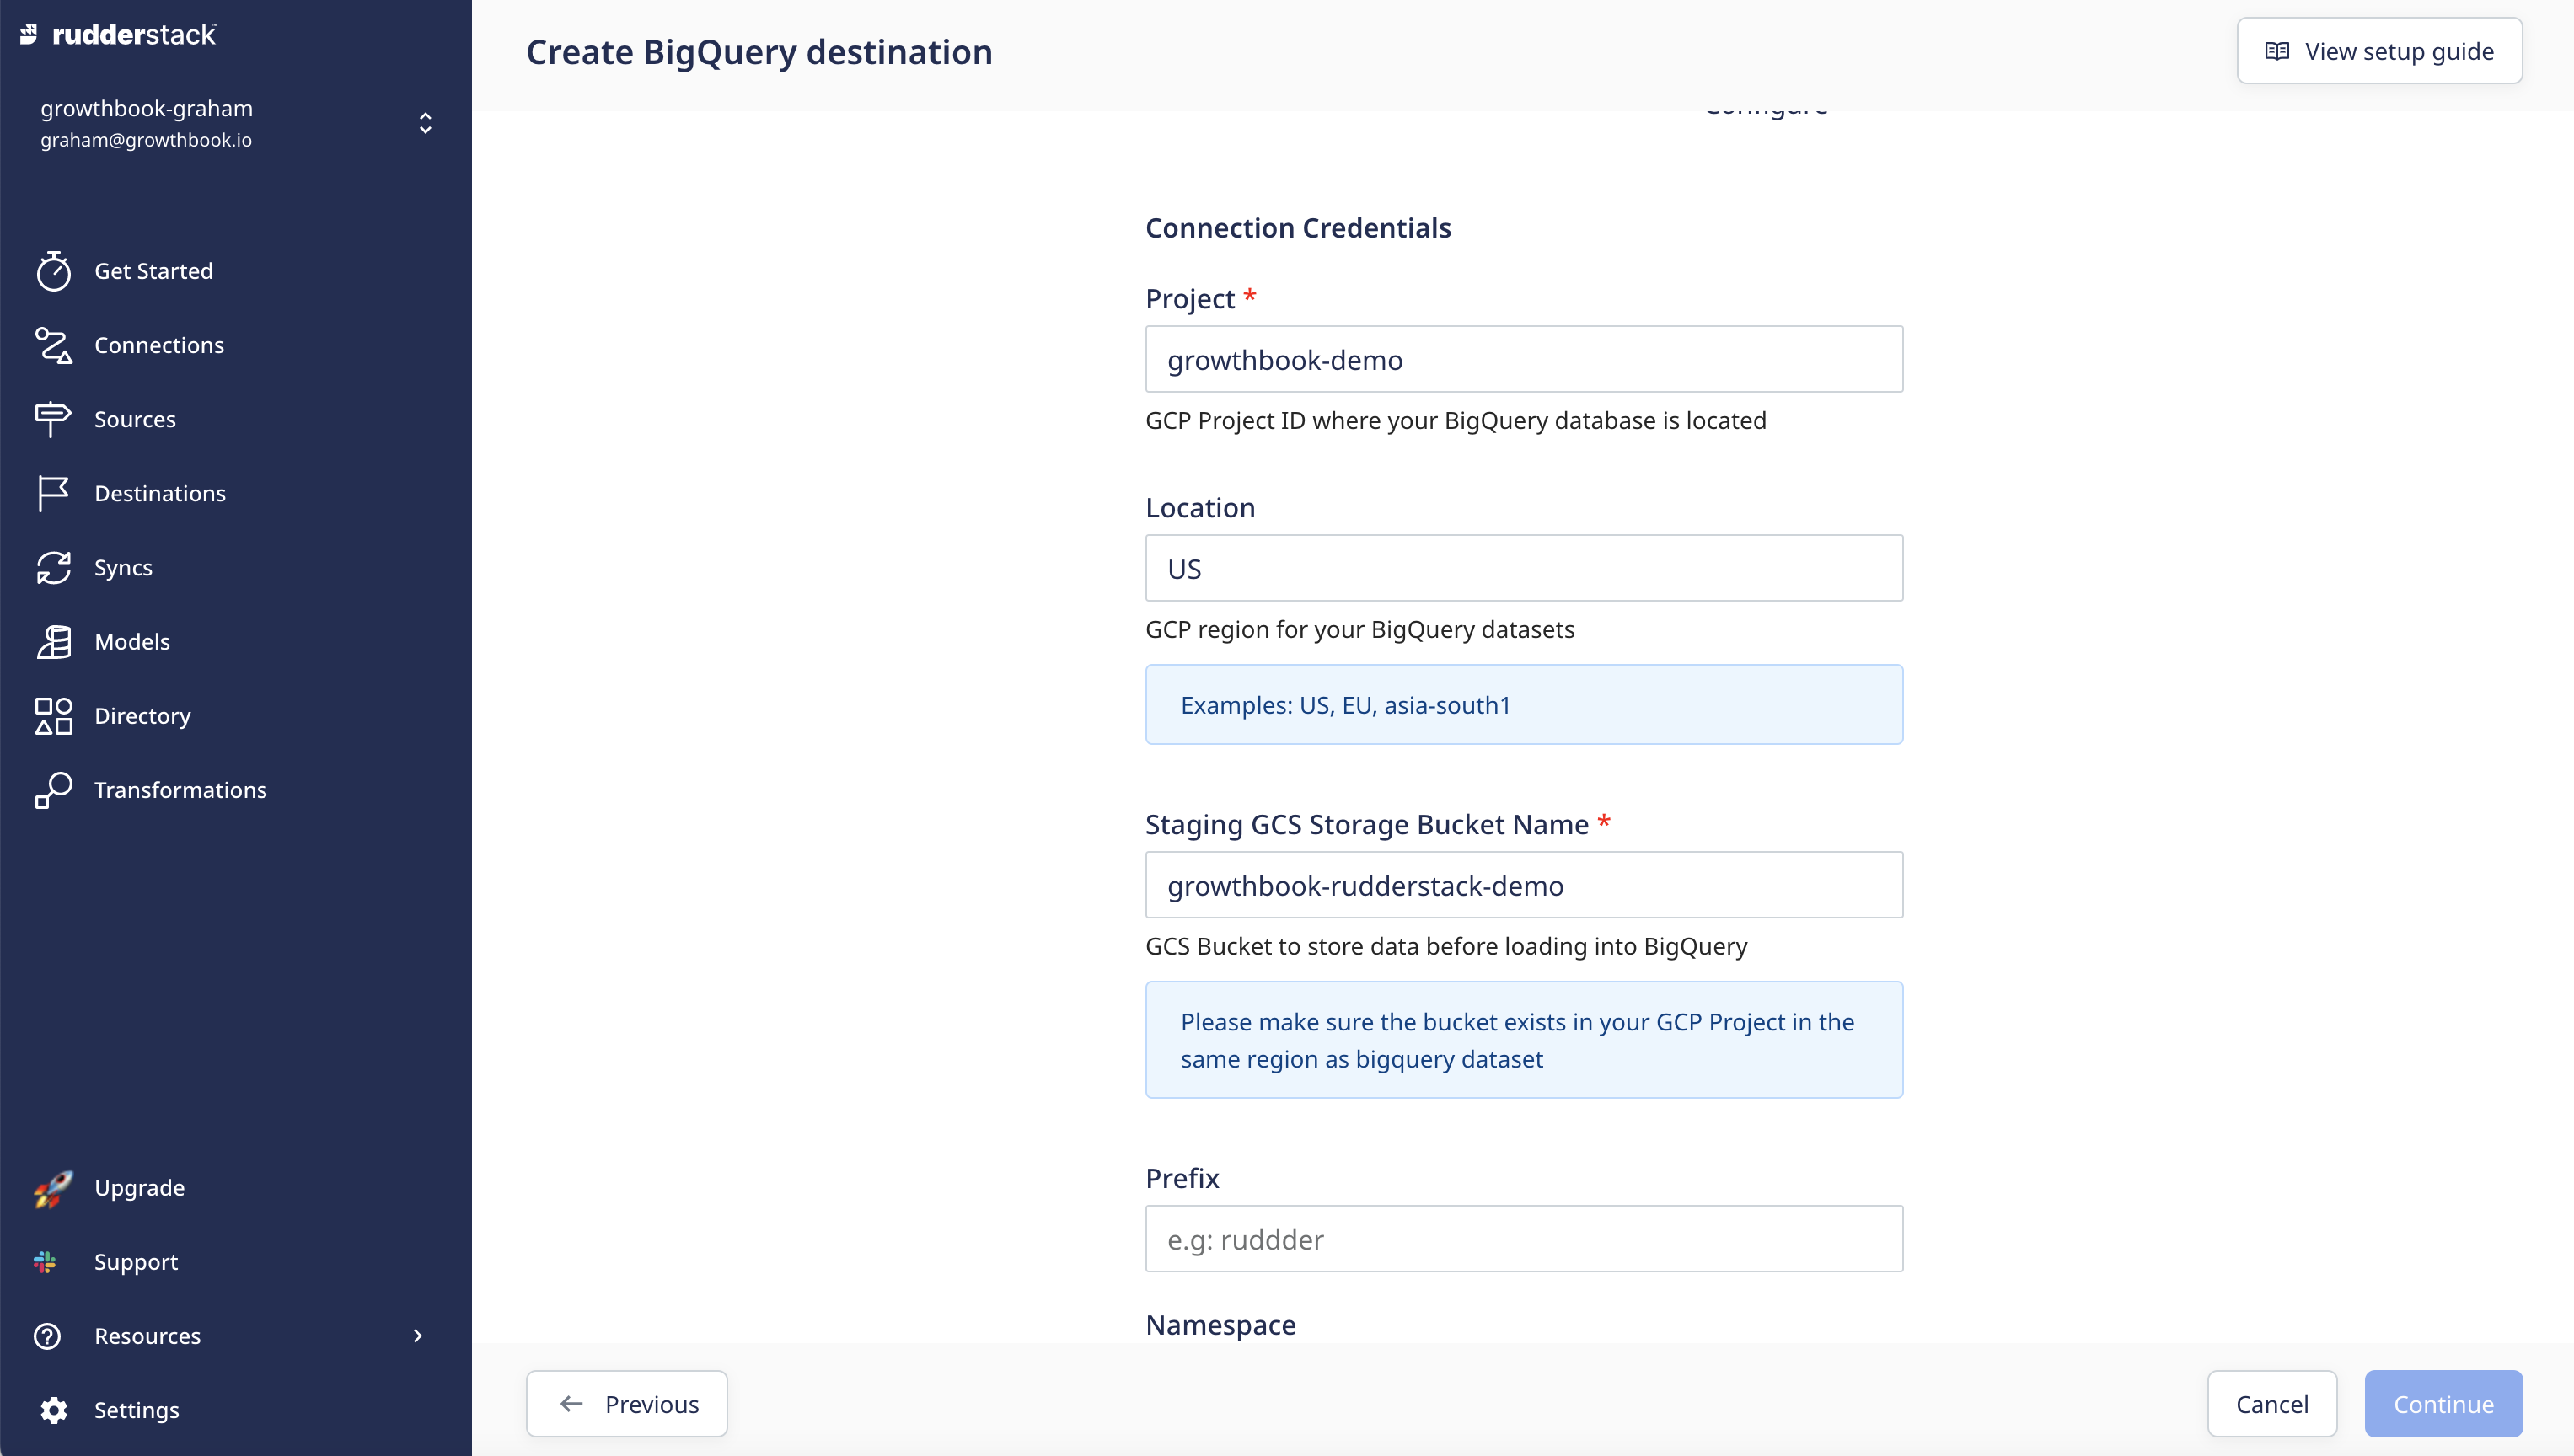 Add the BigQuery account information